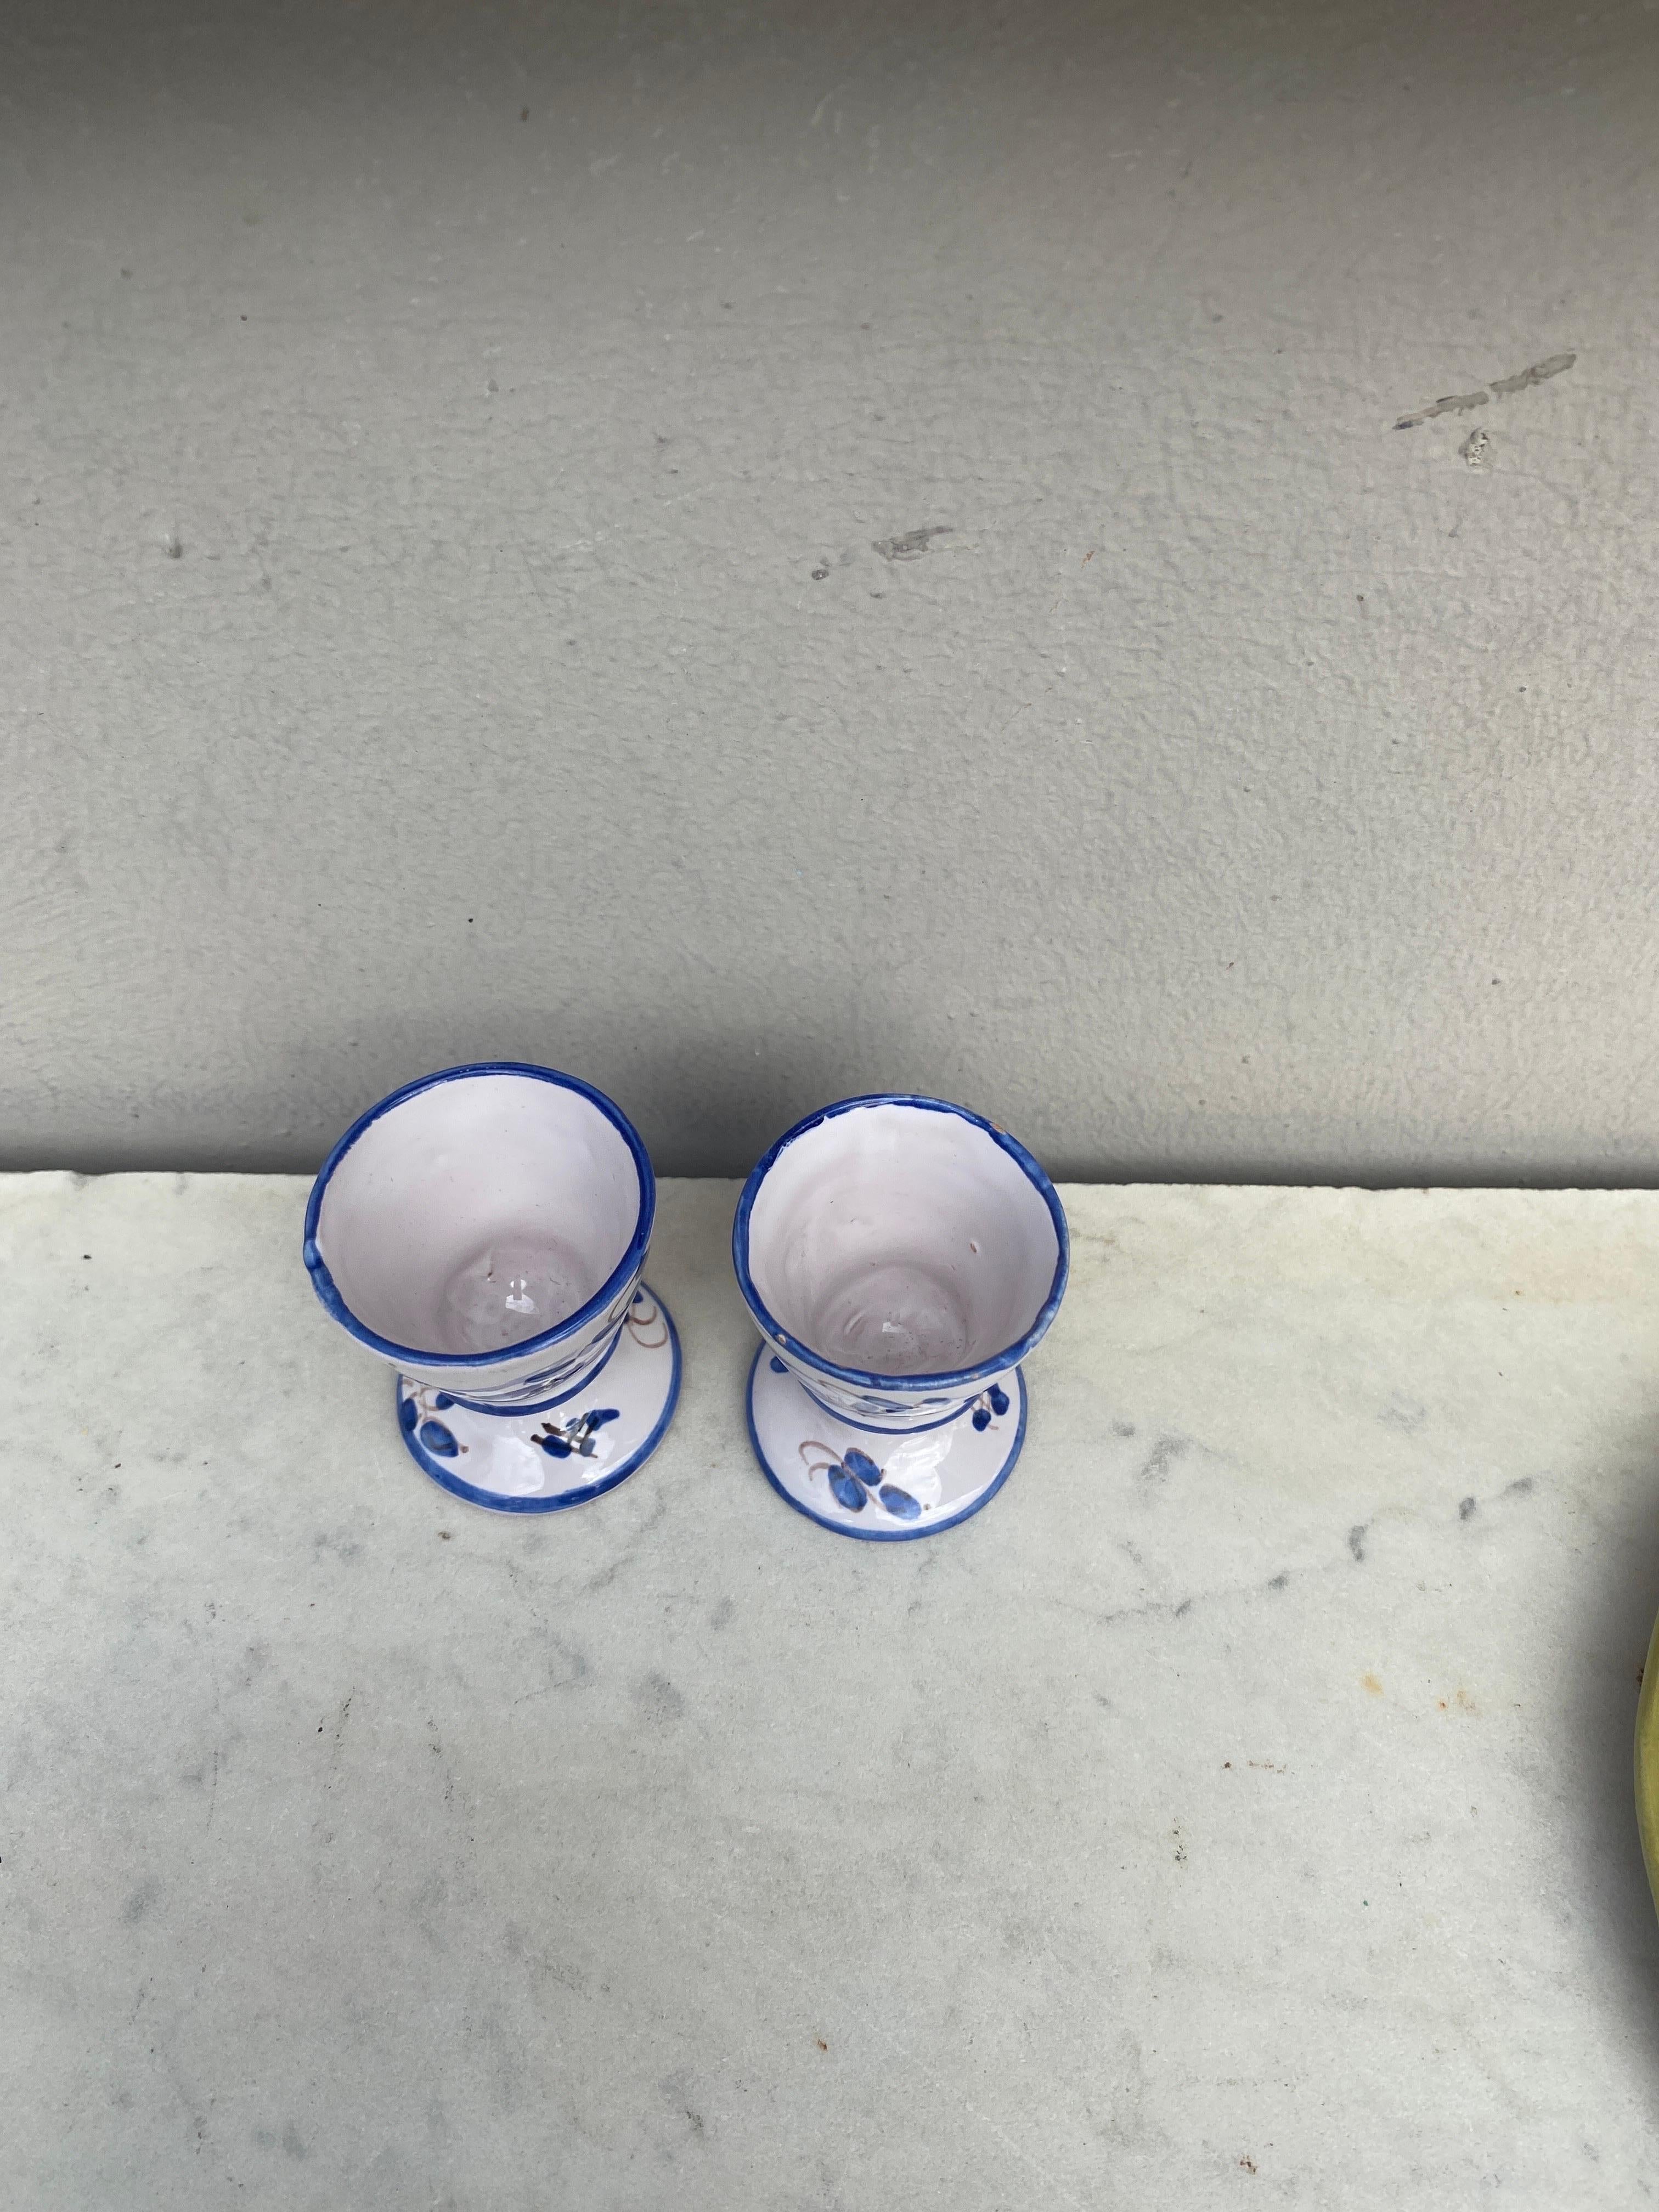 Pair of Blue & White Faience Egg Cups Martres Tolosane In Good Condition For Sale In Austin, TX